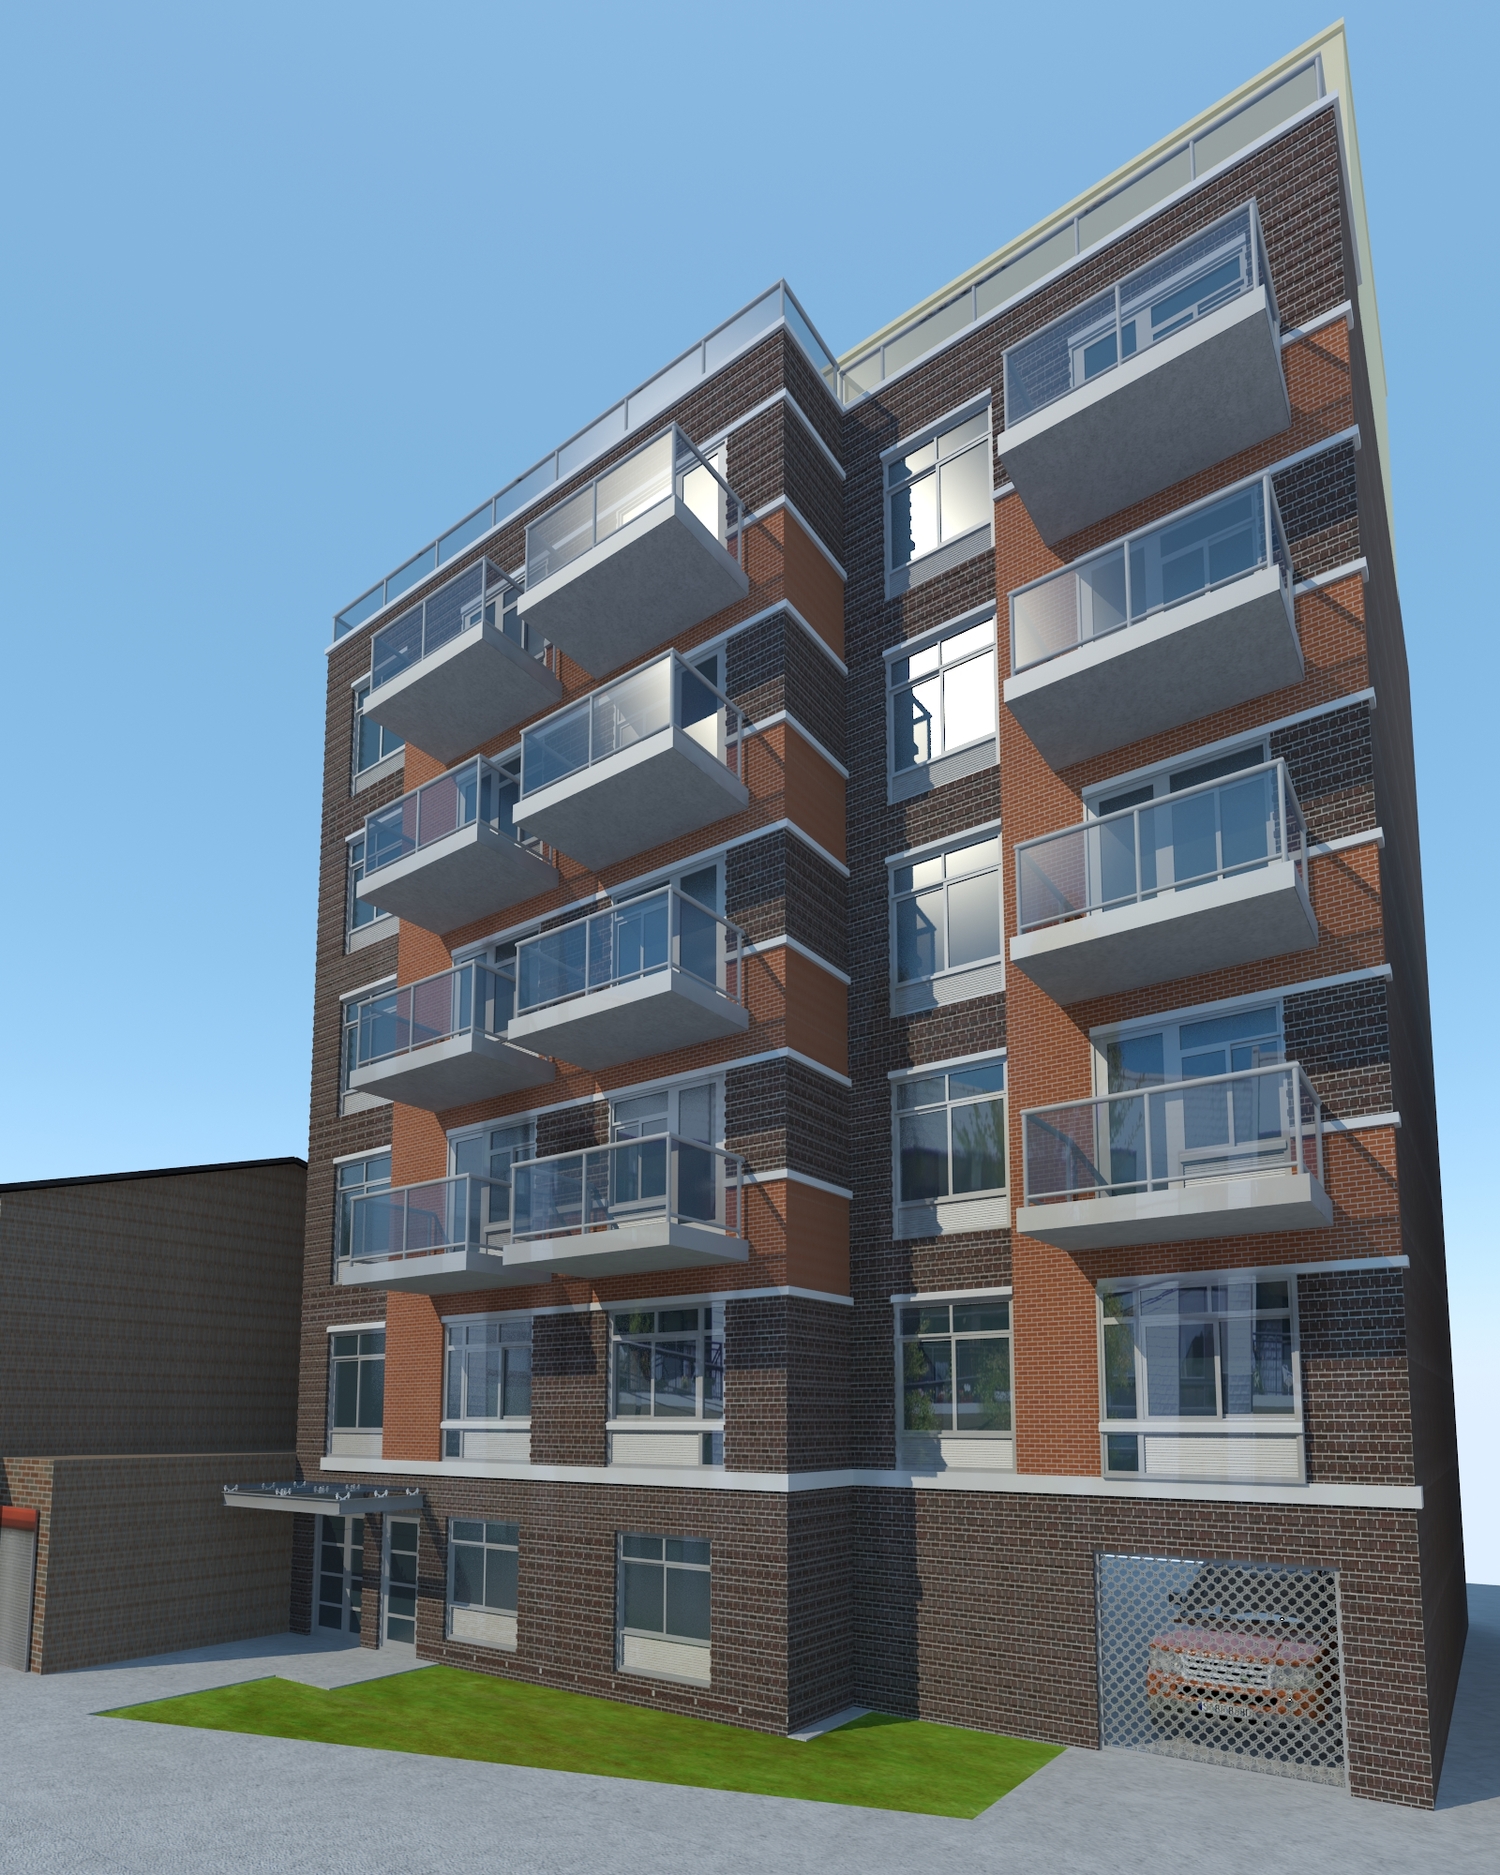 11-07 Welling Court, rendering by Architects Studio